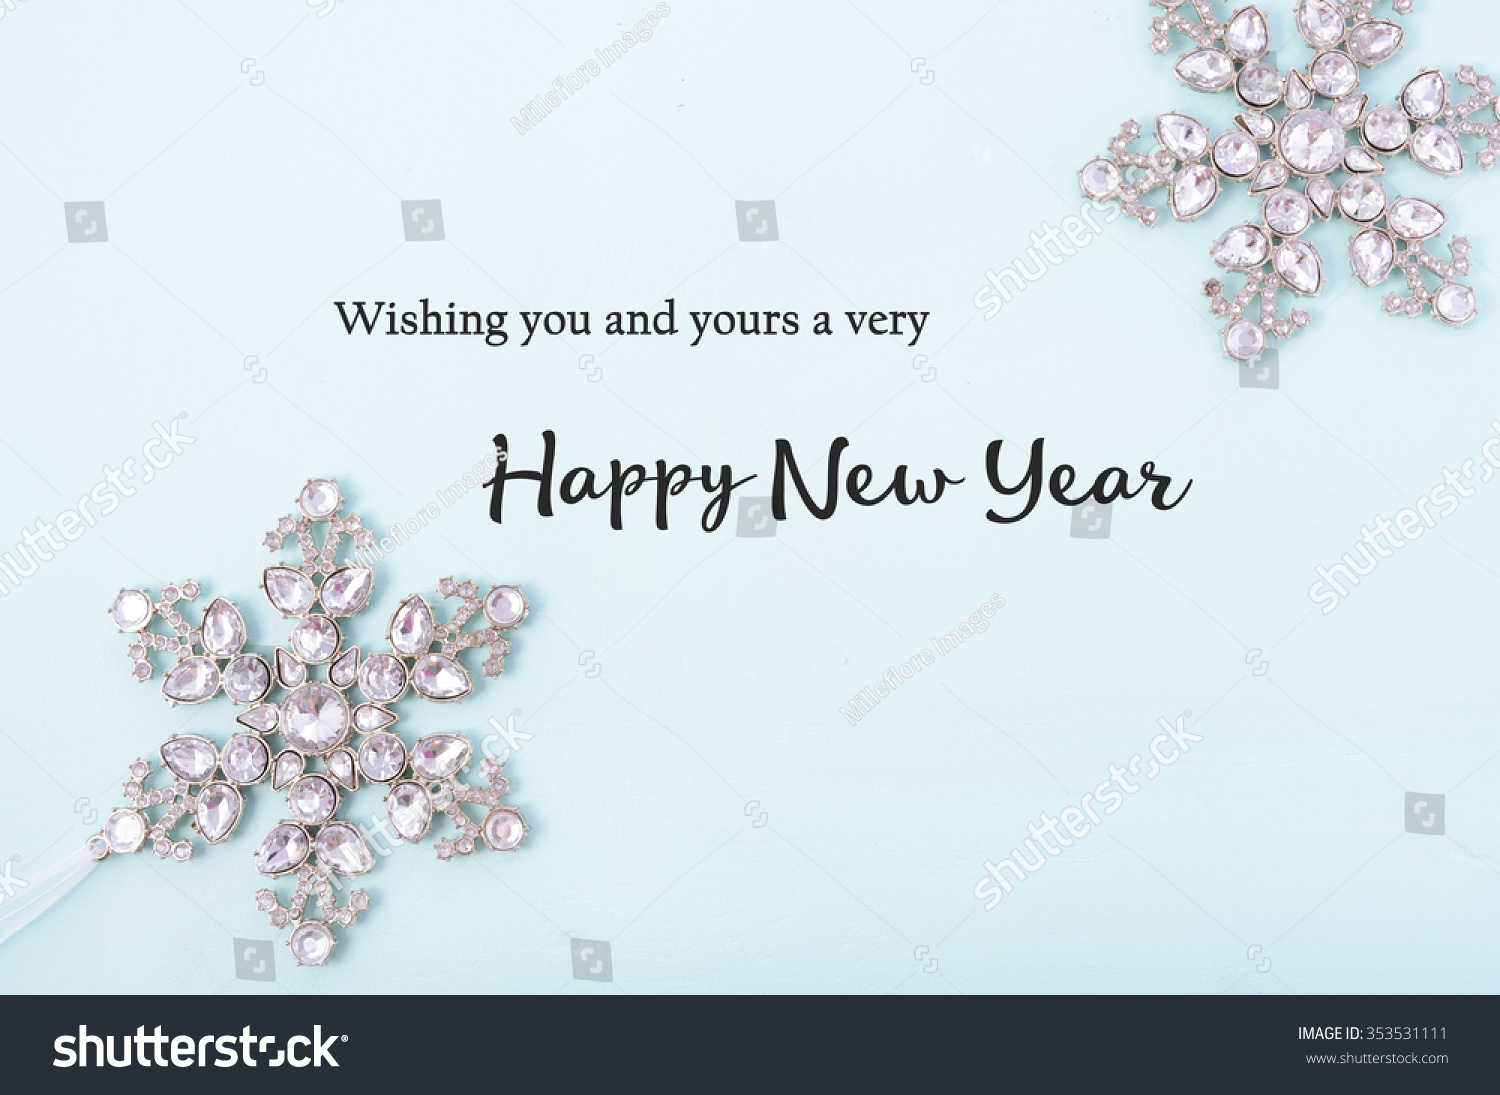 Happy New Year Background with snowflake ornaments on pale blue wood with sample text greeting.  #353531111